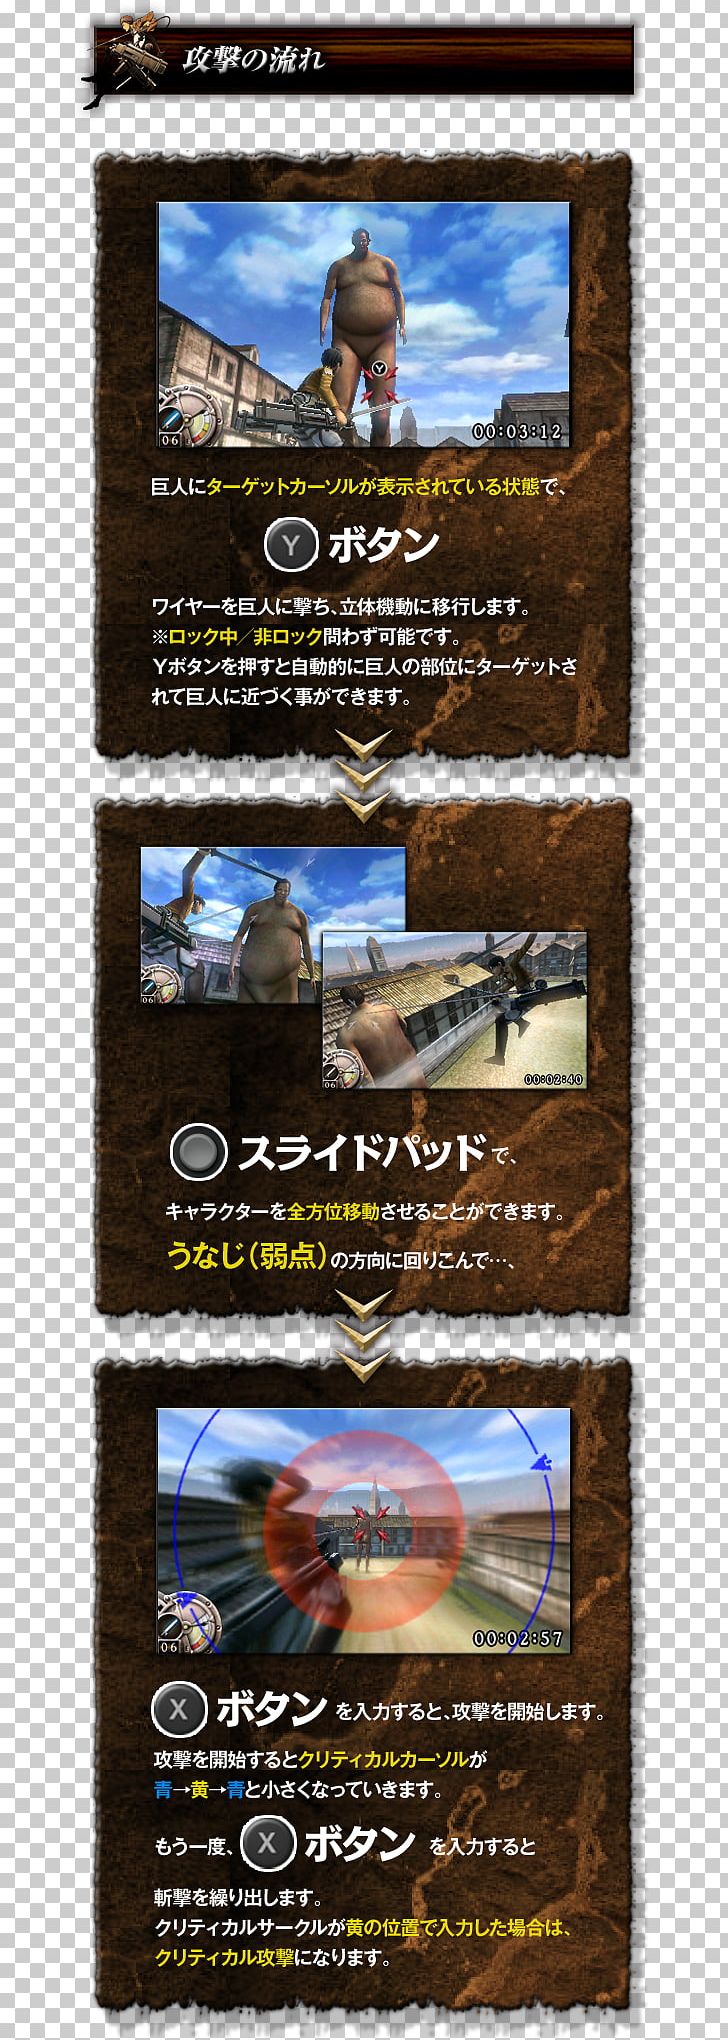 Attack On Titan: Humanity In Chains Nintendo 3DS System Online Game PNG, Clipart, Advertising, Attack On Titan, Attack On Titan Humanity In Chains, Nintendo 3ds, Online Game Free PNG Download